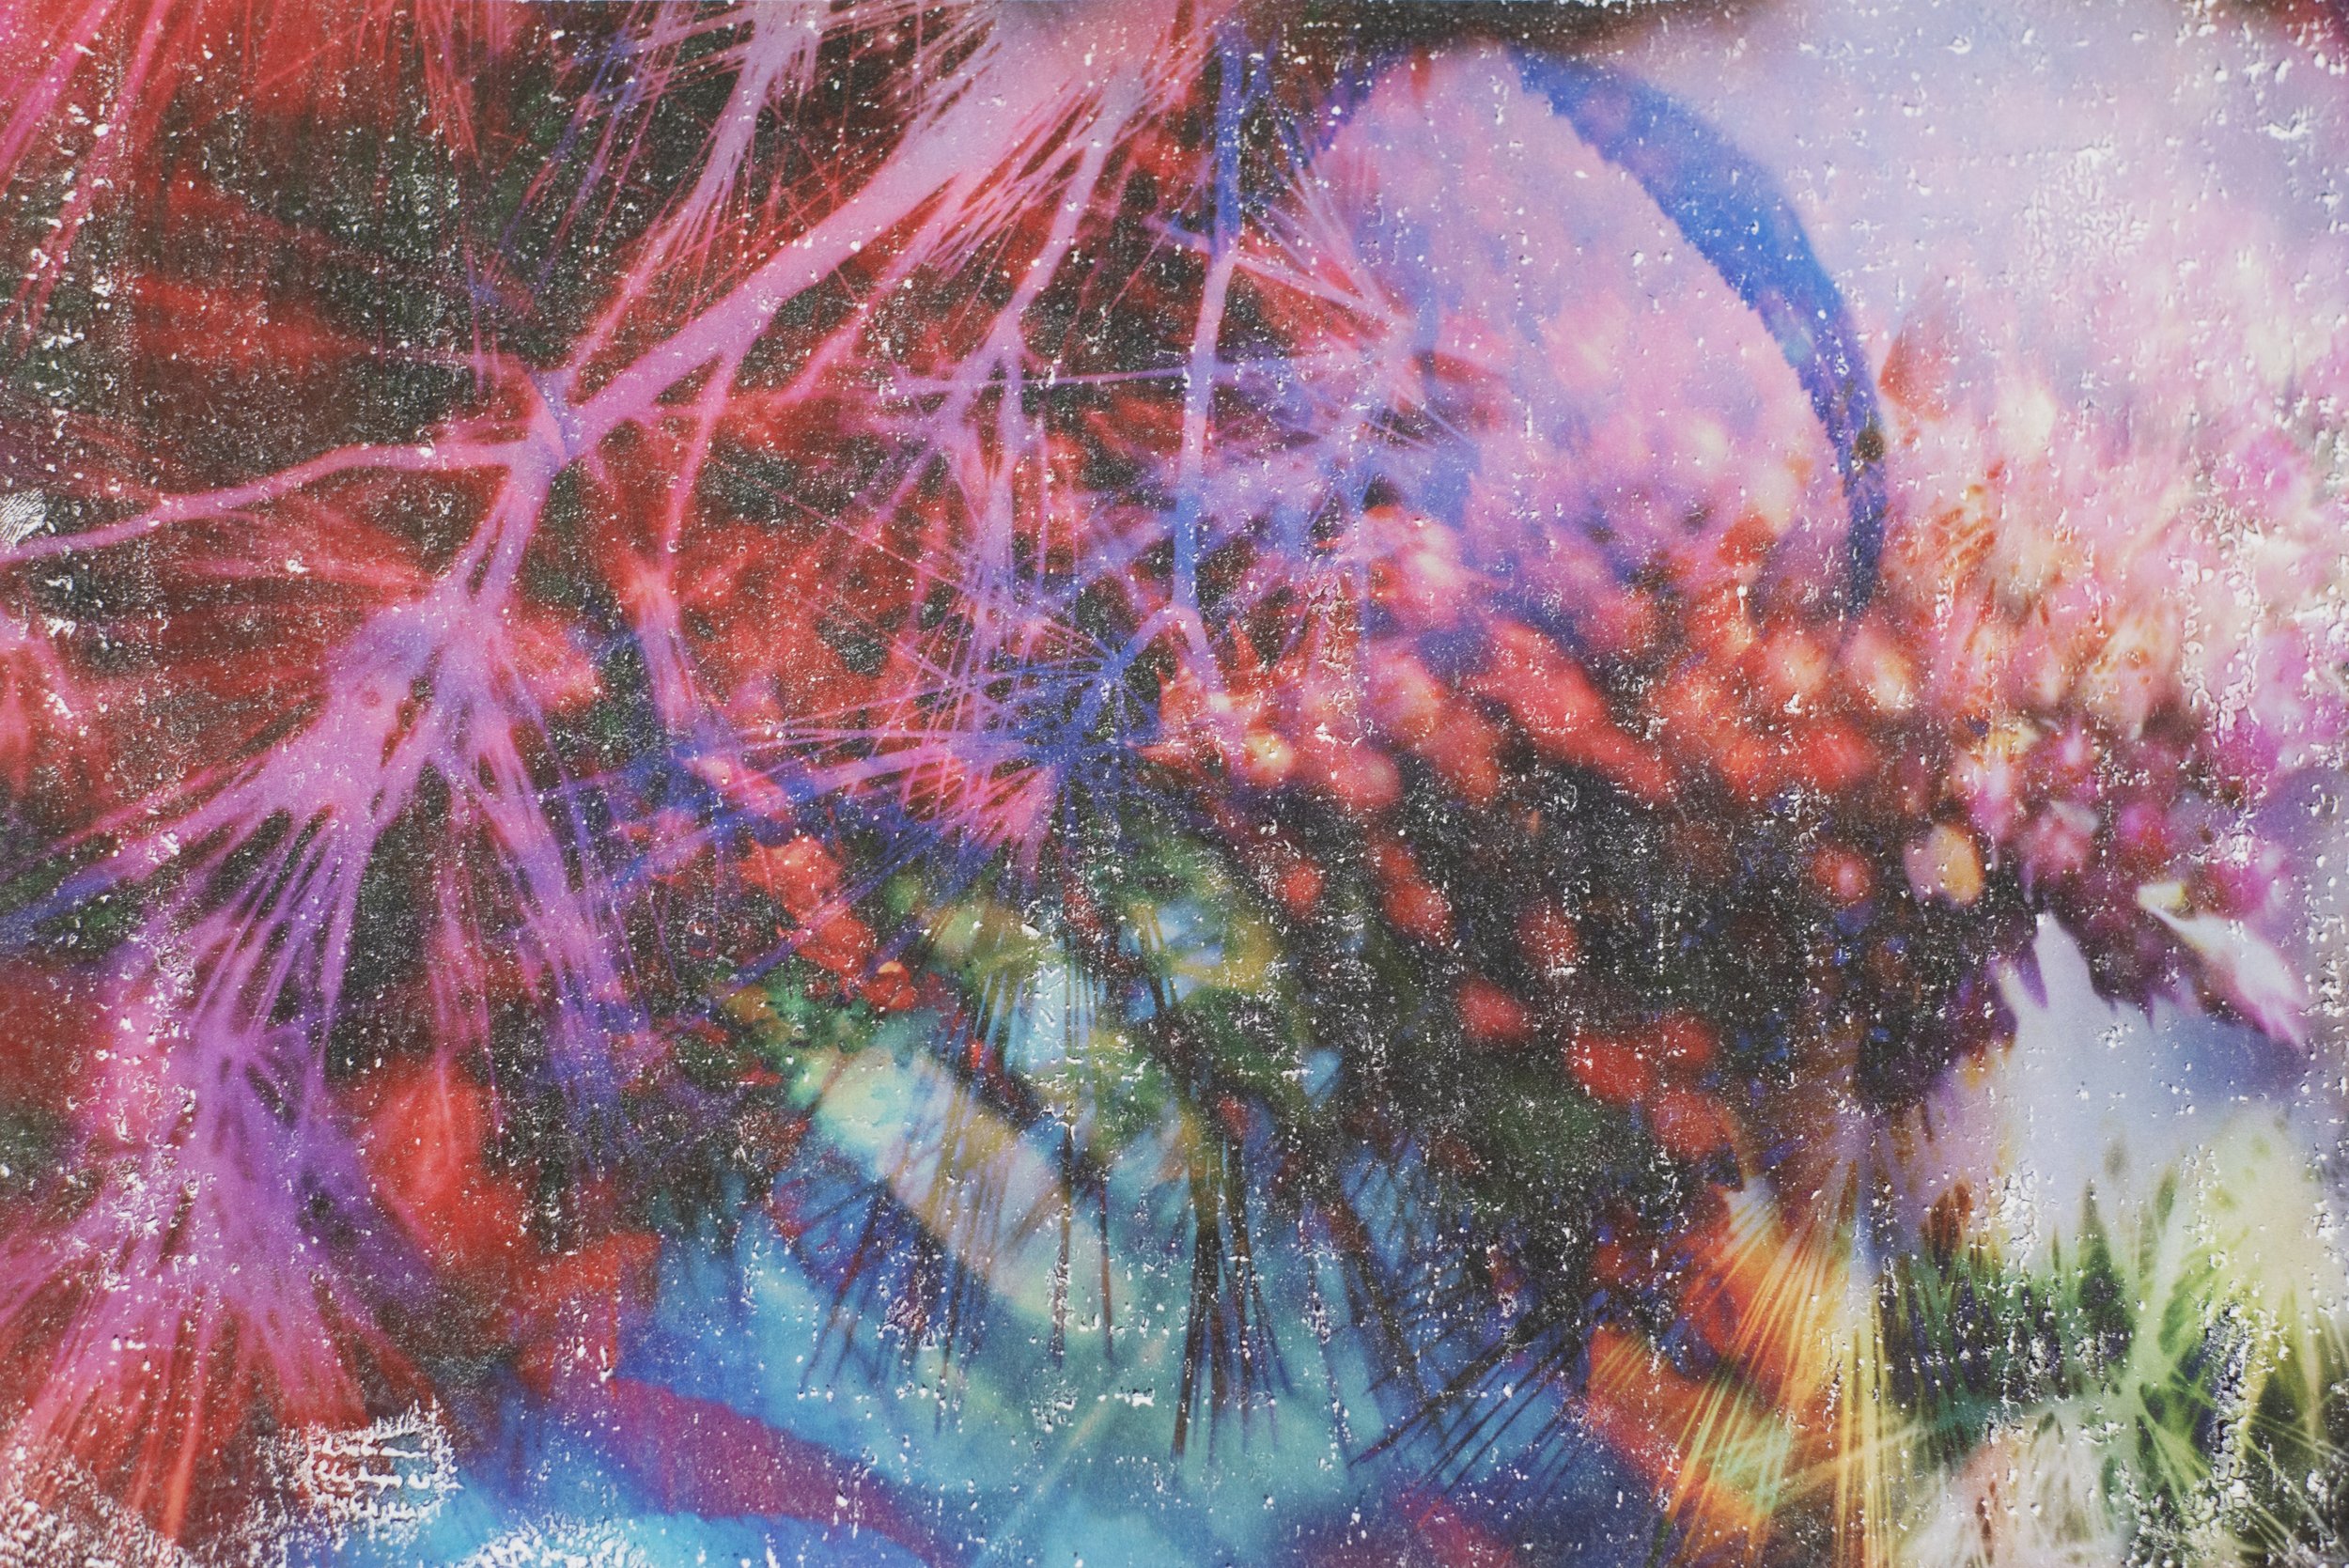  Hyperstimulation Fracture 0640, 2019 8x10”  Archival Pigment Photo Transfer on Watercolor Paper 